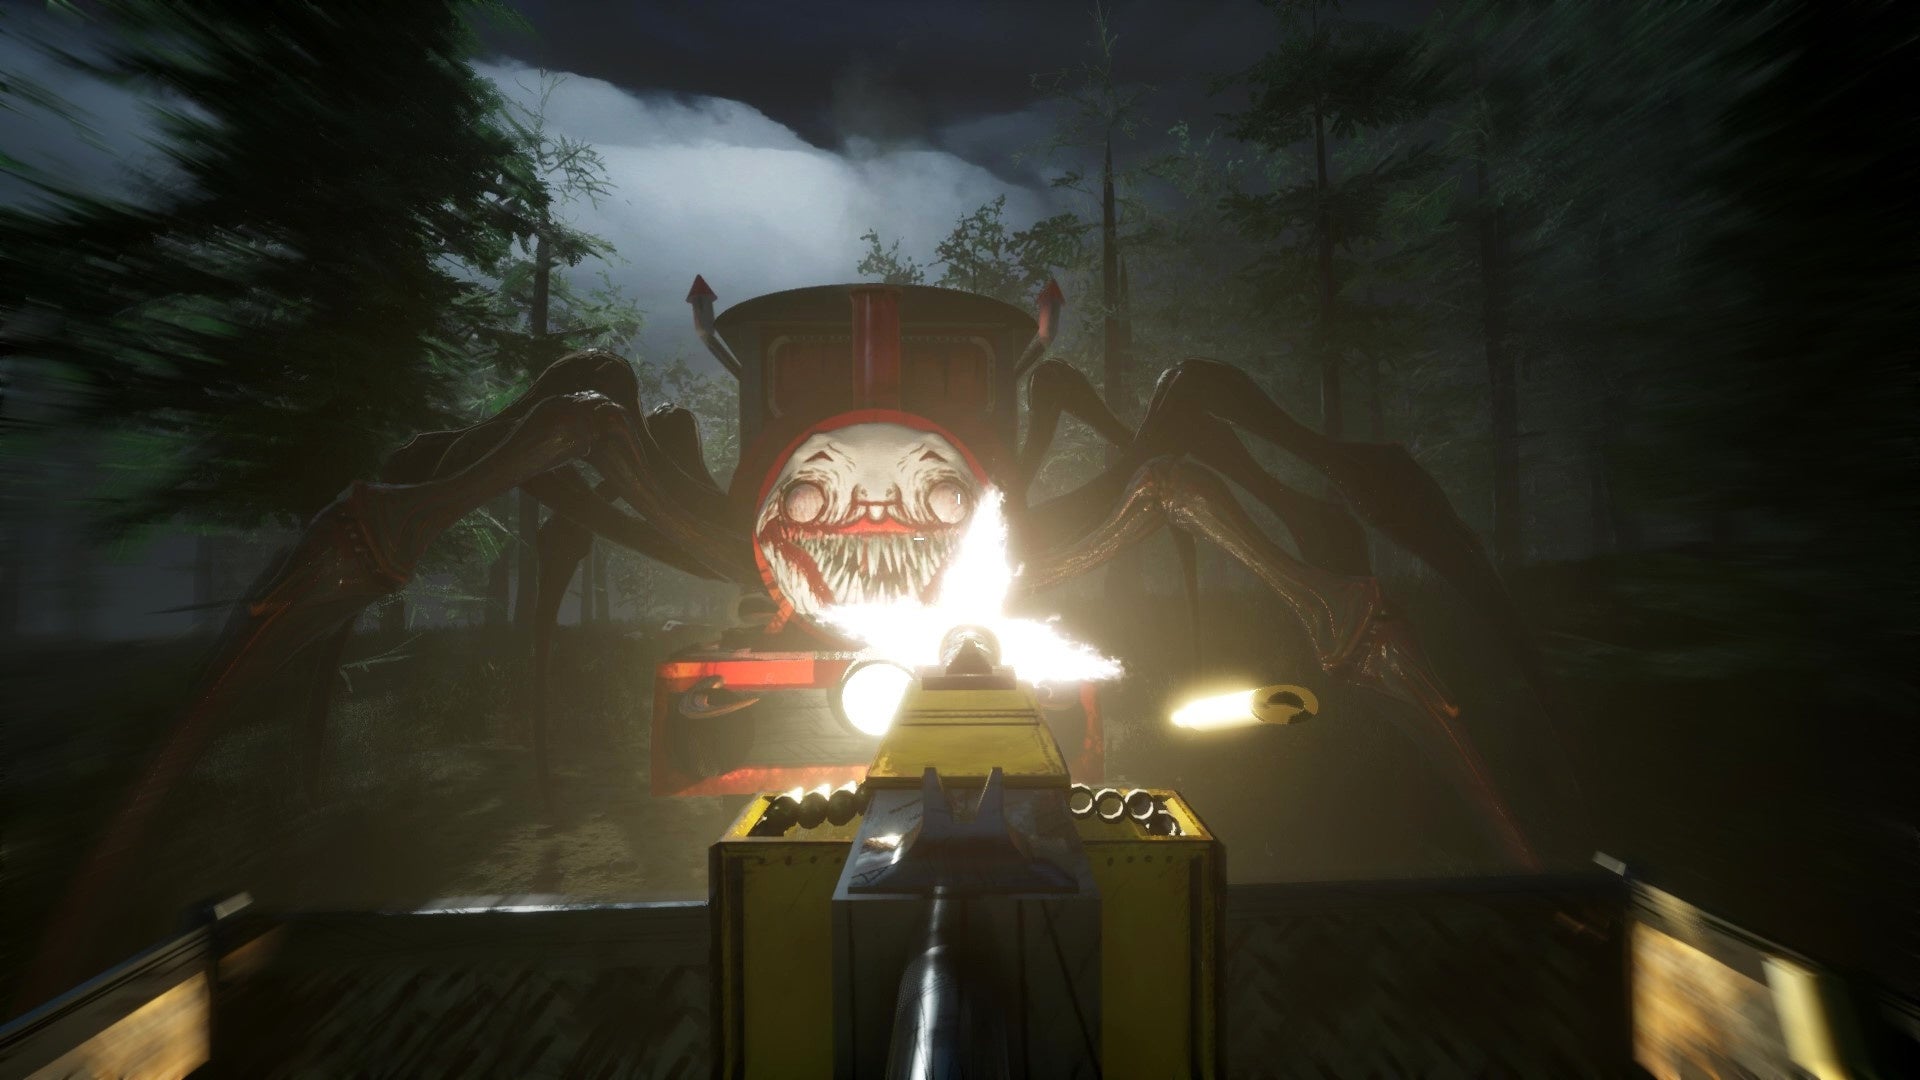 A screenshot of Choo-Choo Charles, showing a mounted turret firing at a train with a demonic face and spider legs.